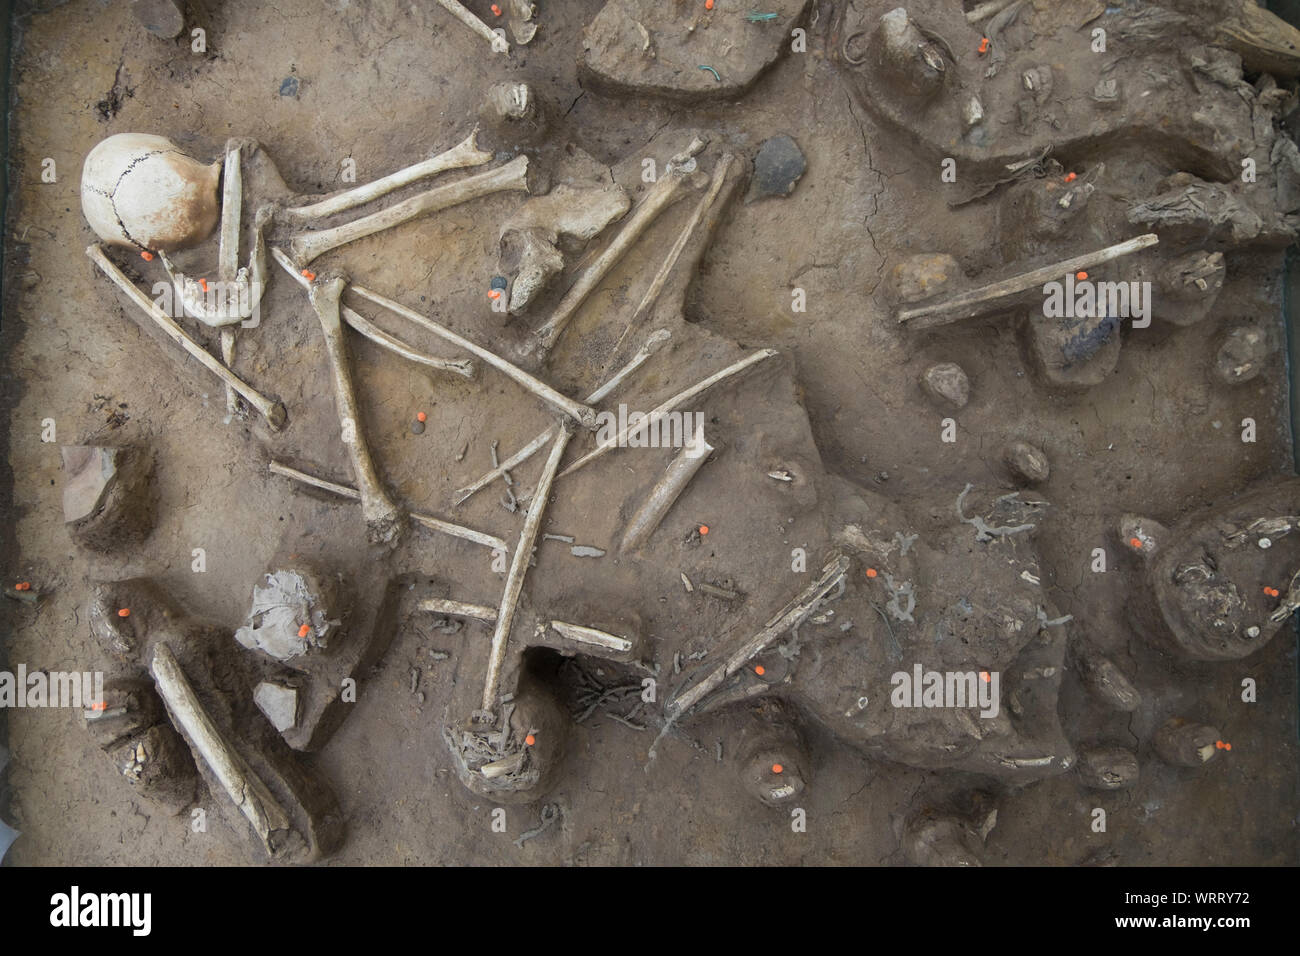 A look at a mass grave of the killing fields that's partially excavated at the Choeung Ek Genocidal Center, outiside Phnom Penh, Cambodia. Stock Photo